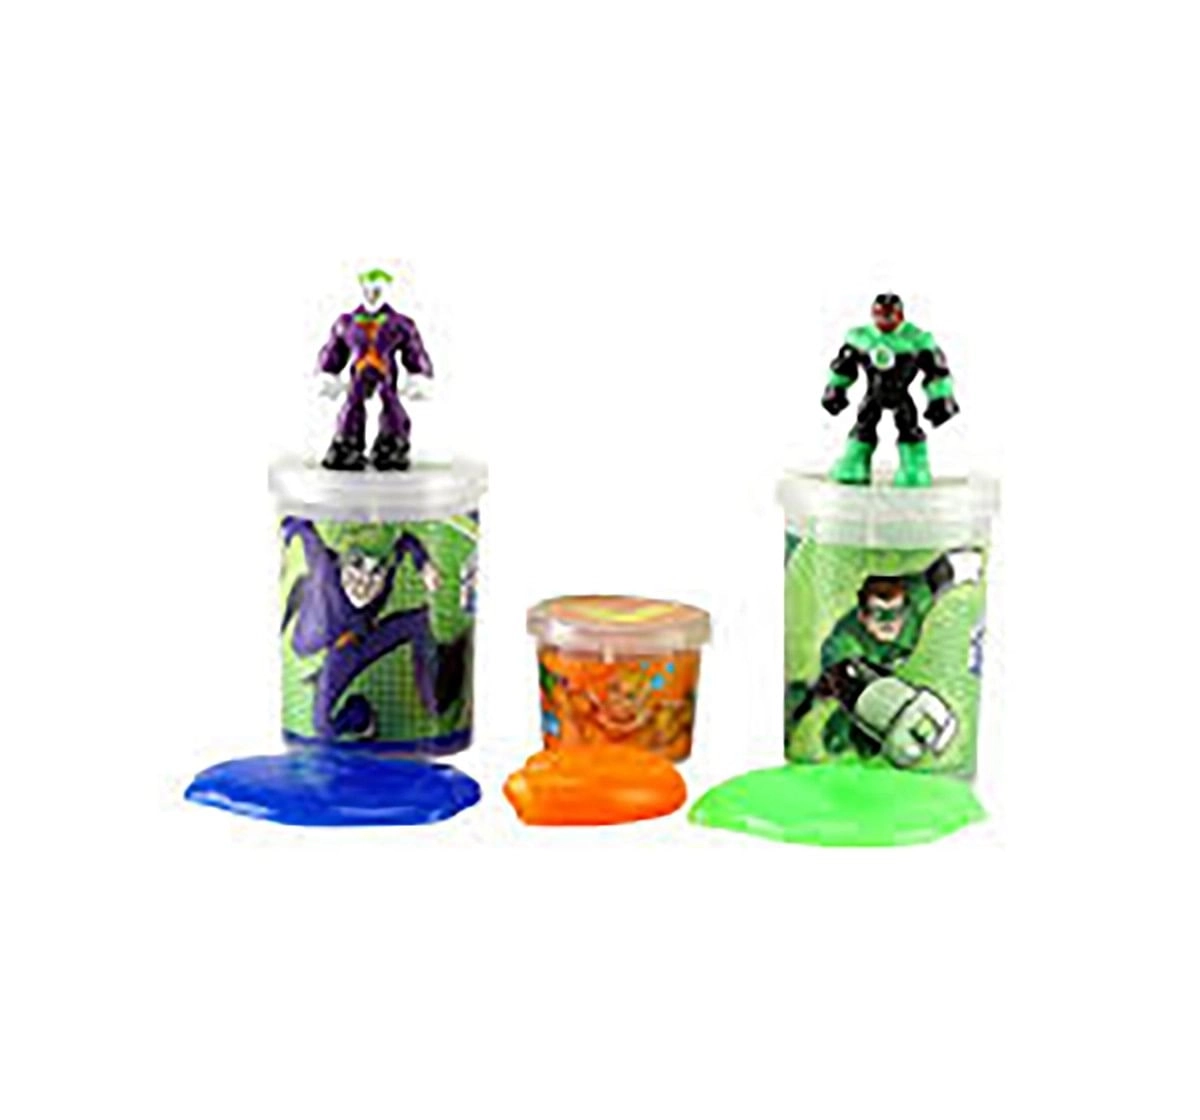 DC Super Friends The Joker & Green Lantern Slime Mix with 2 Liquid & 1 Jelly Slime